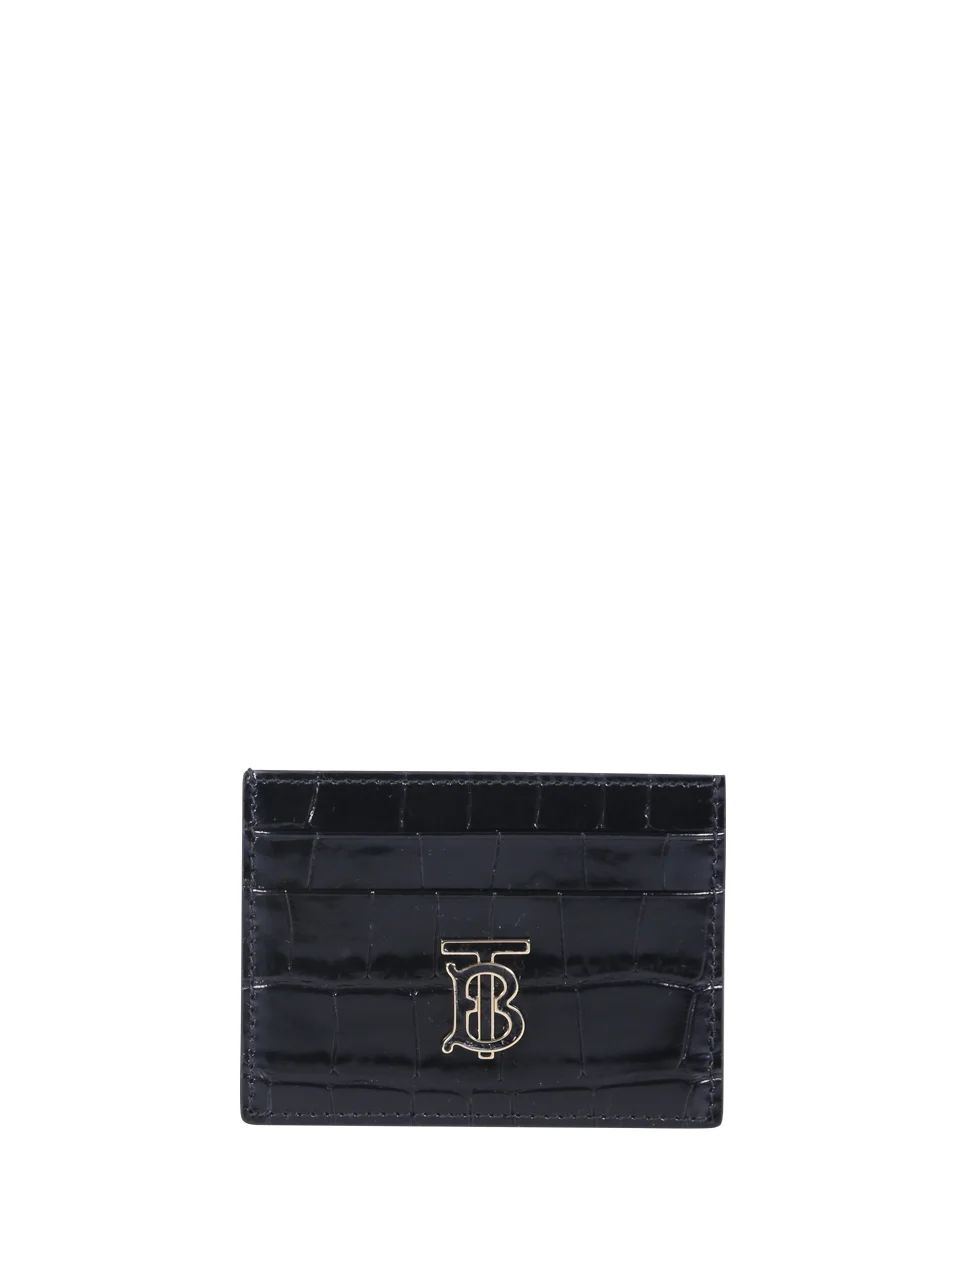 Burberry Embossed TB Plaque Card Case | Cettire Global